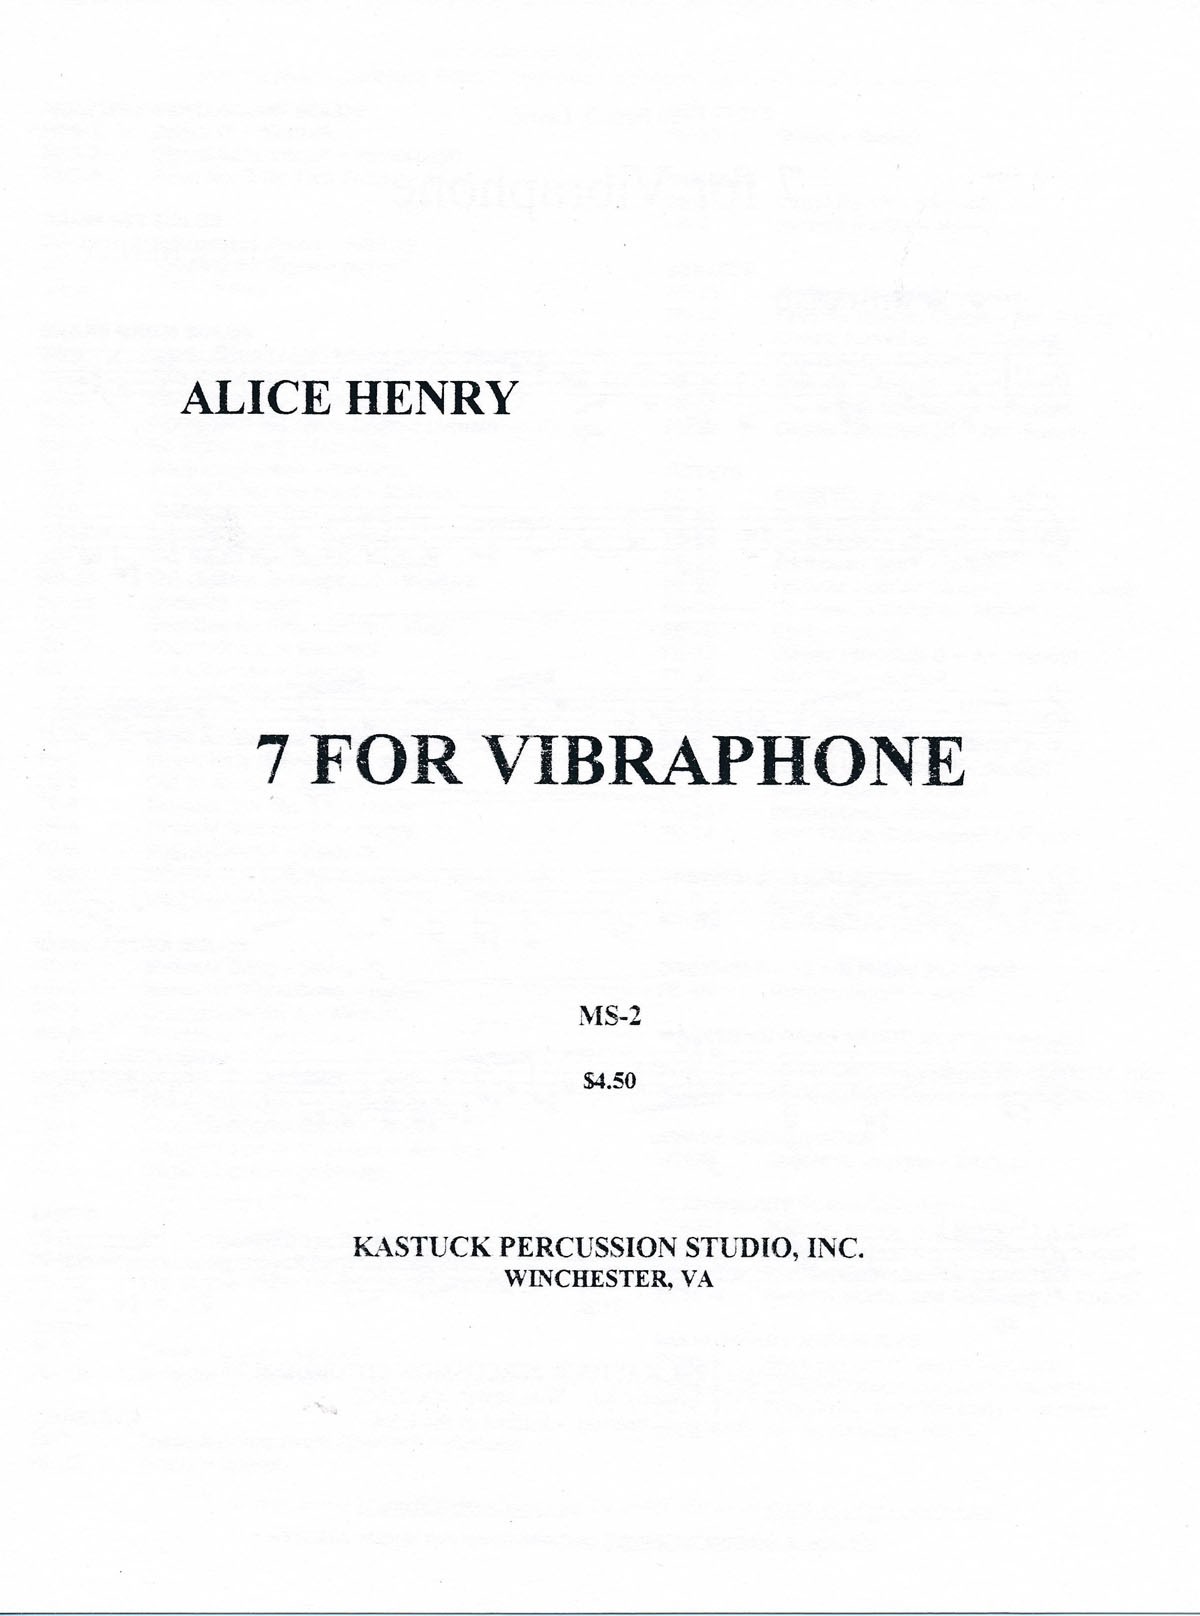 7 for Vibraphone by Alice Henry